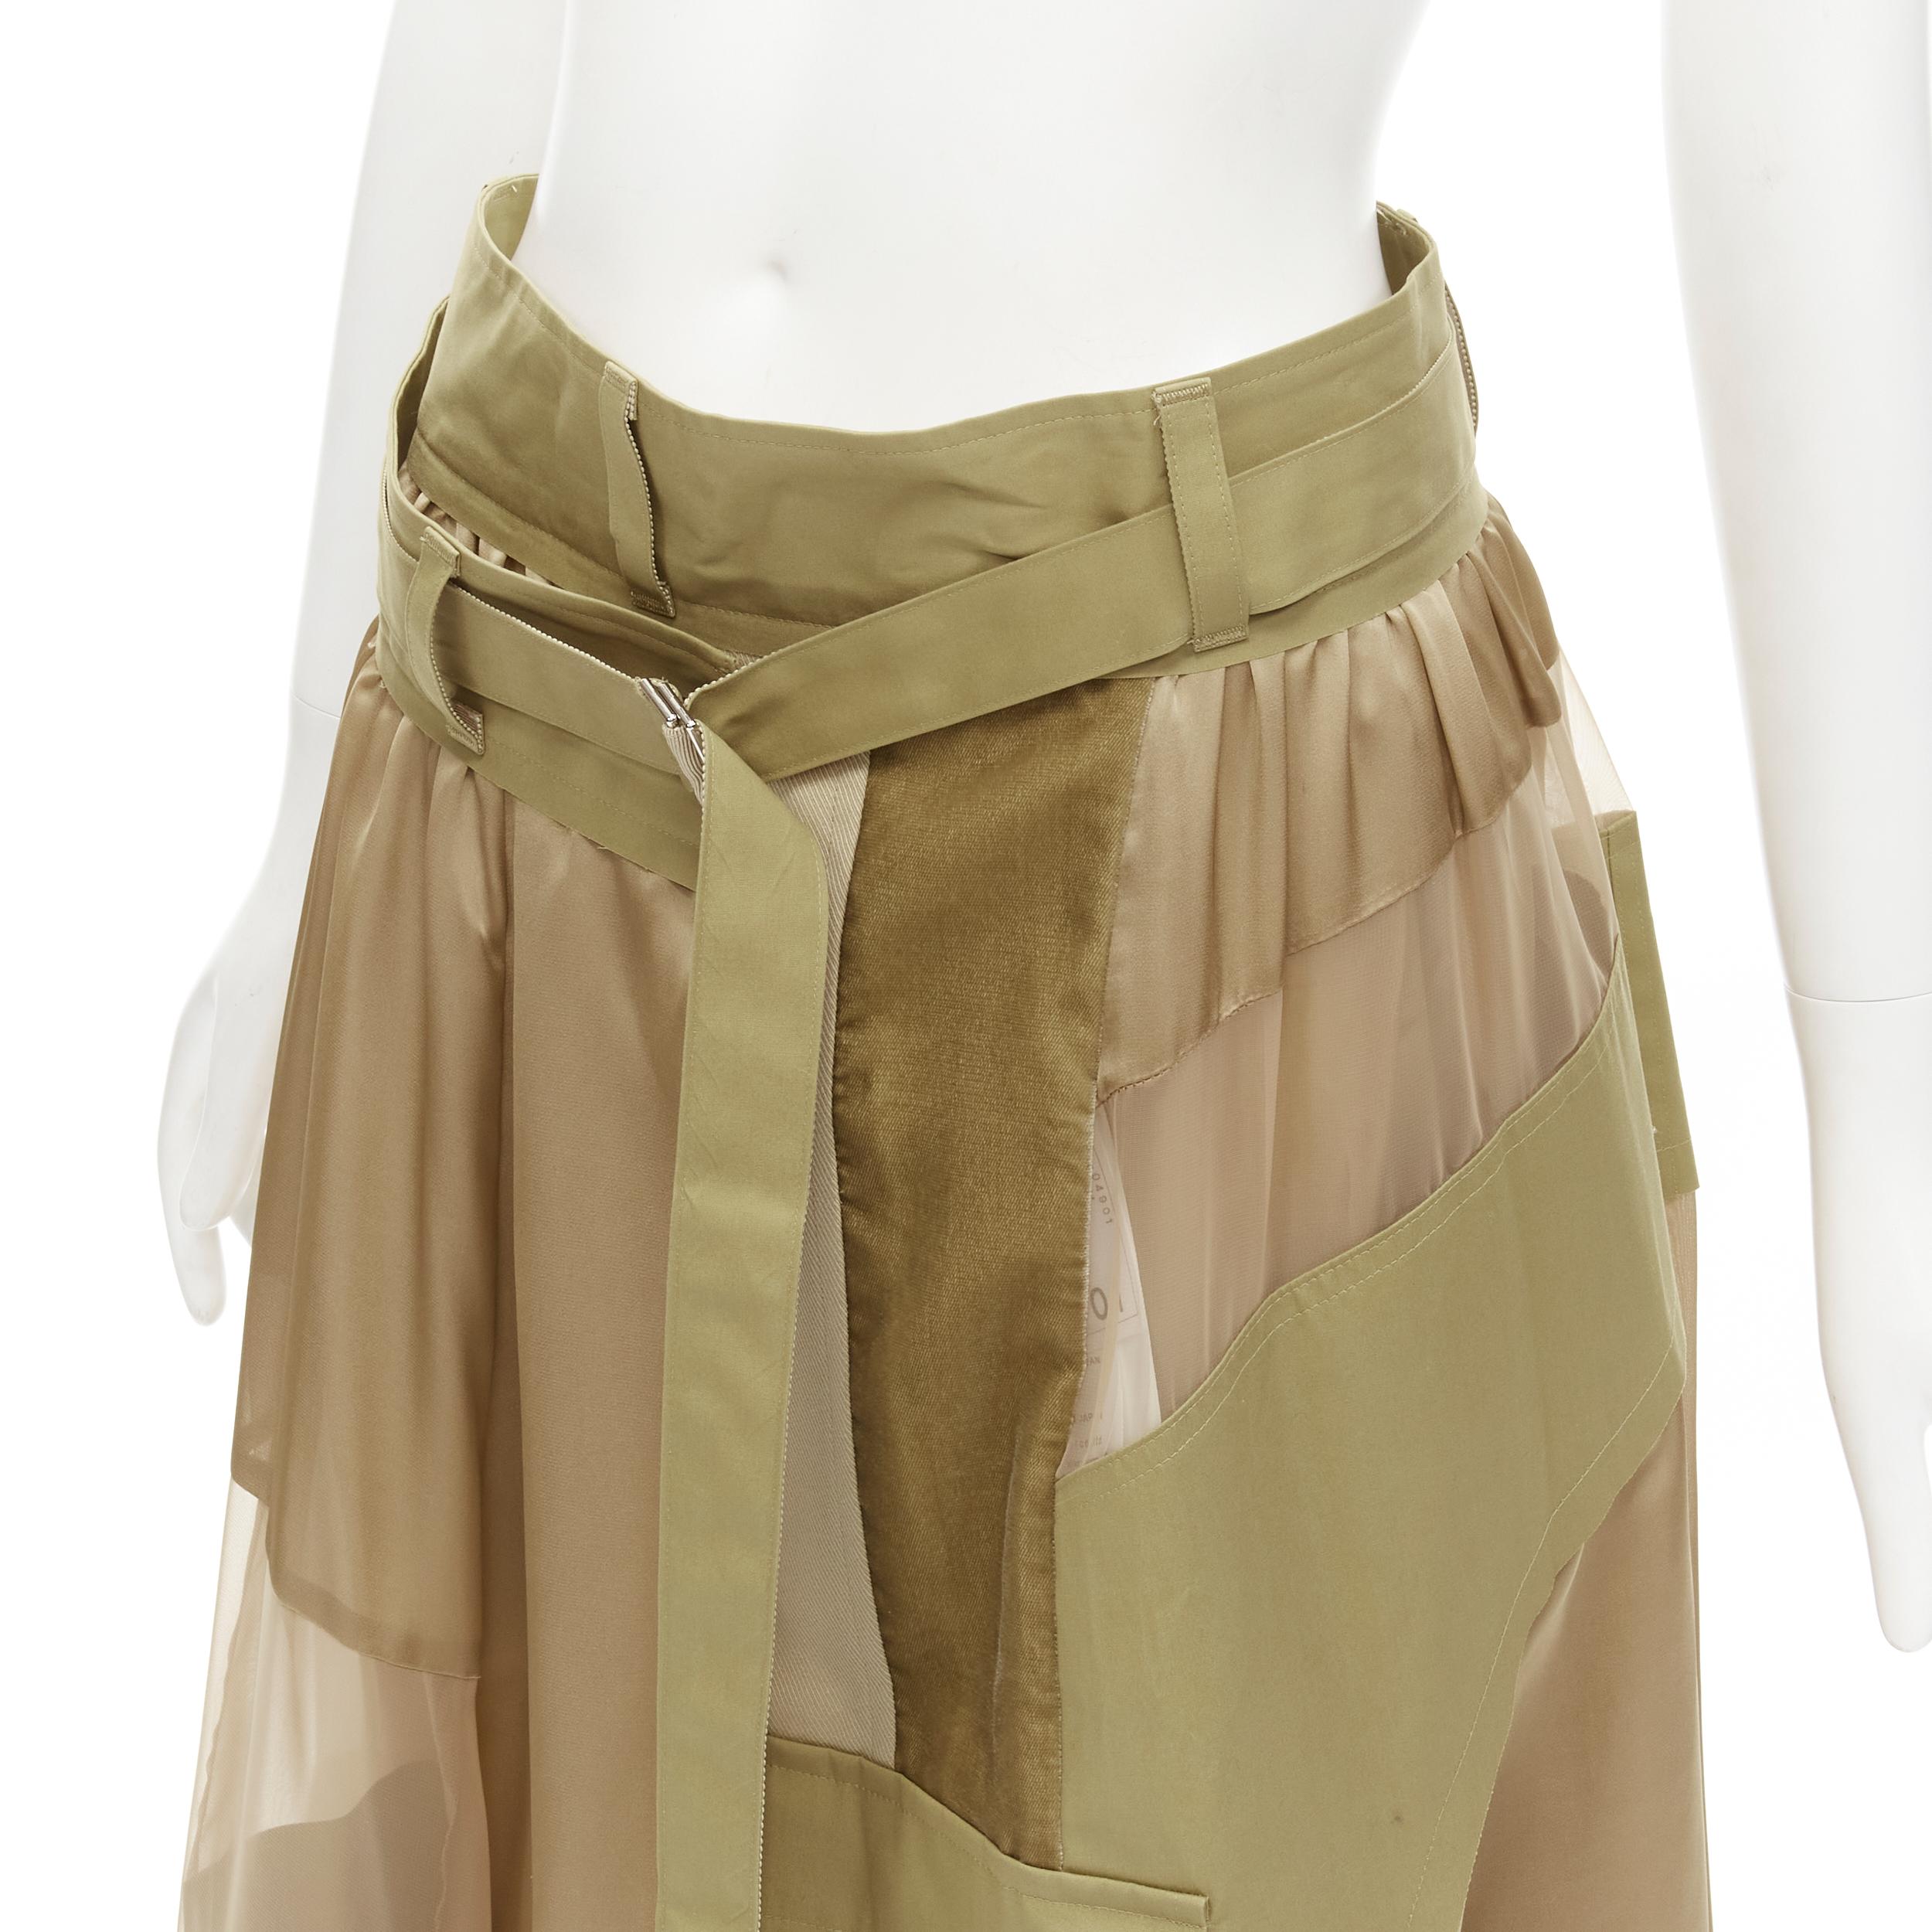 new SACAI 2020 khaki military patchwork sheer deconstructed belted skirt JP3 L
Brand: Sacai
Designer: Chitose Abe
Collection: 2020 
Material: Mixed Materials
Color: Brown
Pattern: Solid
Closure: Belt
Extra Detail: Beige cotton and viscose mixed